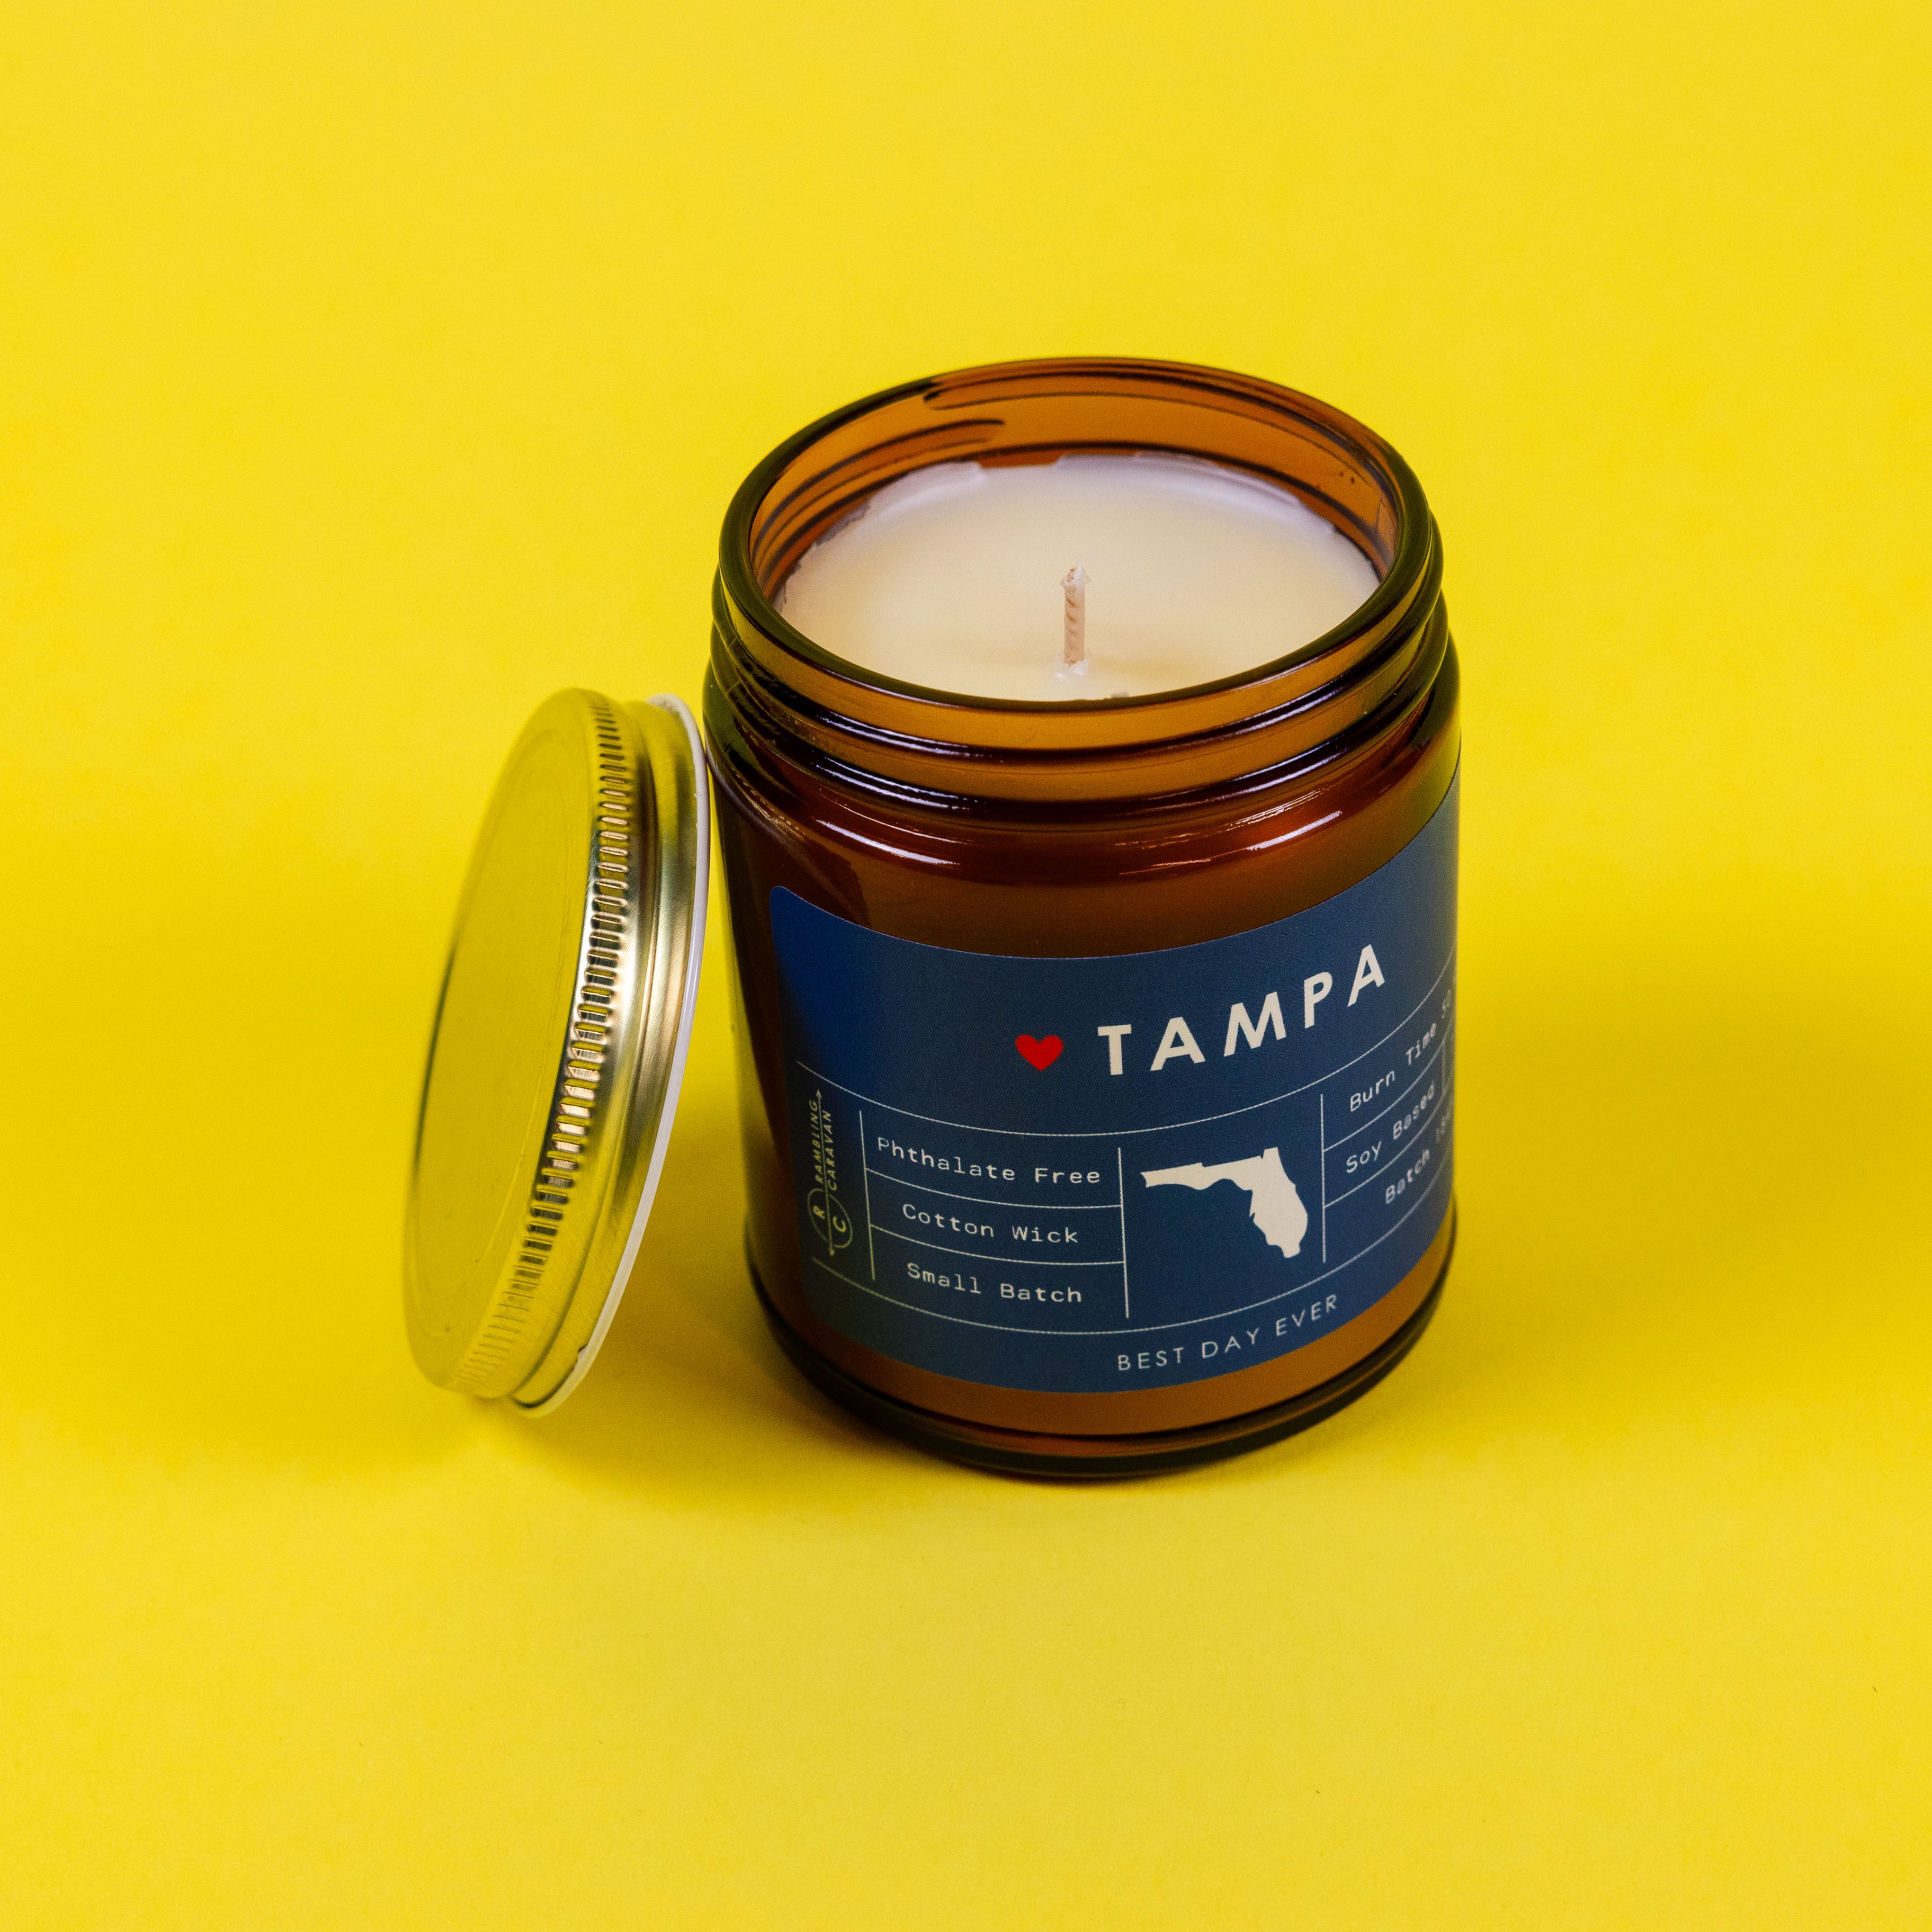 Tampa, FL Candle